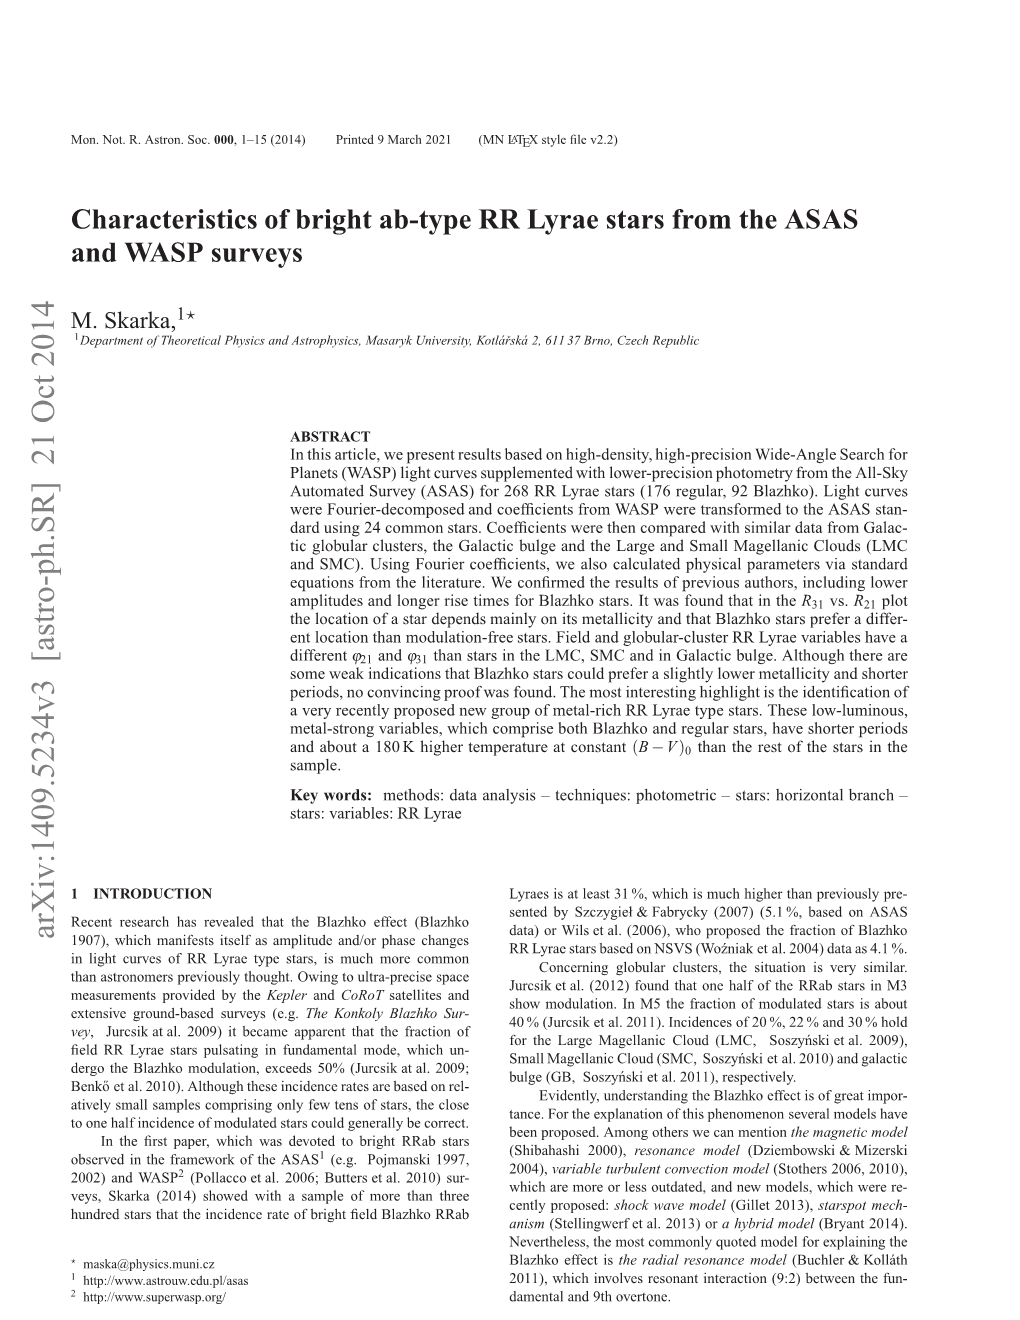 Characteristics of Bright Ab-Type RR Lyrae Stars from the ASAS And